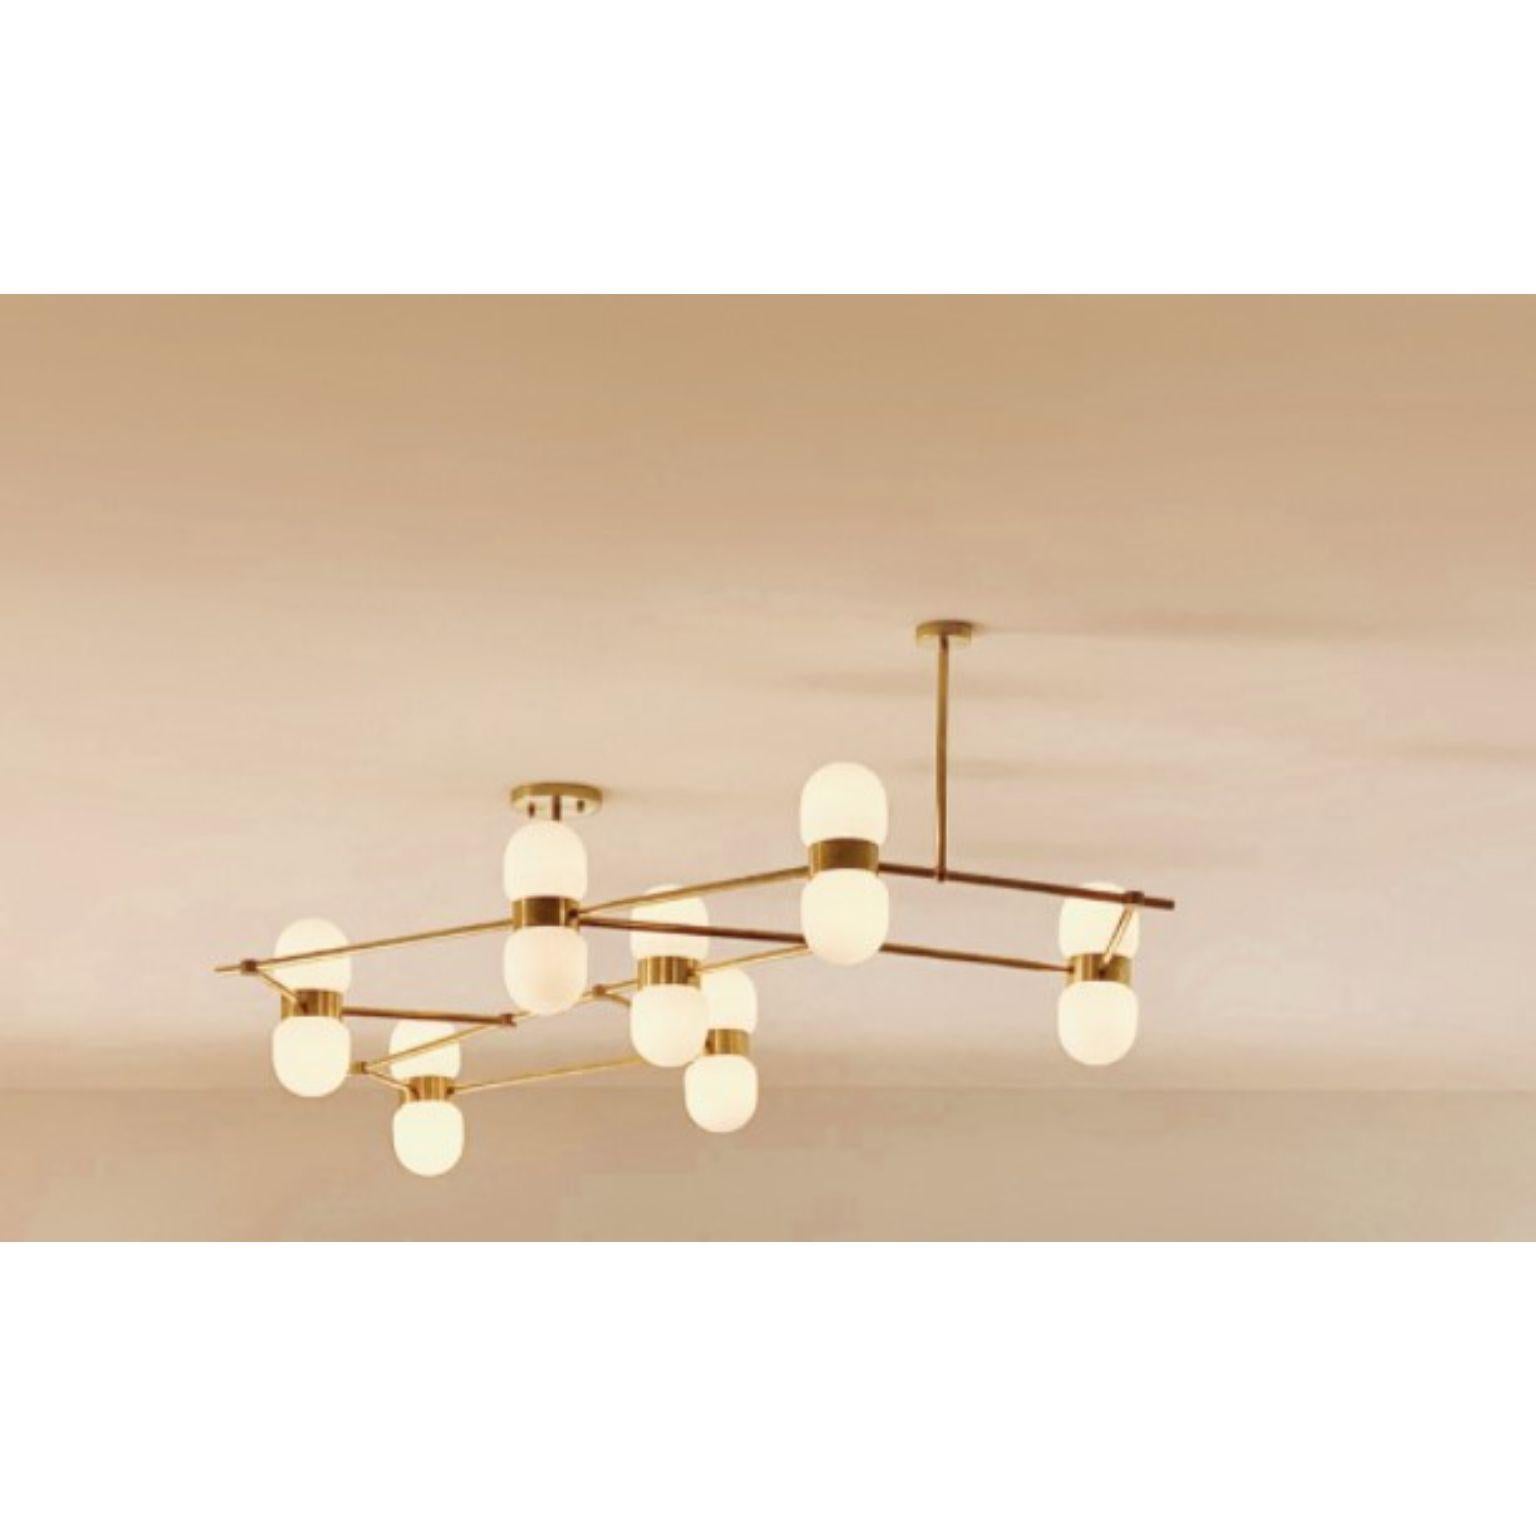 Nuvol chandelier 7 lamps by Contain
Dimensions: D150 x W20 x H140 cm
Materials: Brass structure and matte or glossy glass.
Available in different finishes and dimensions.

All our lamps can be wired according to each country. If sold to the USA